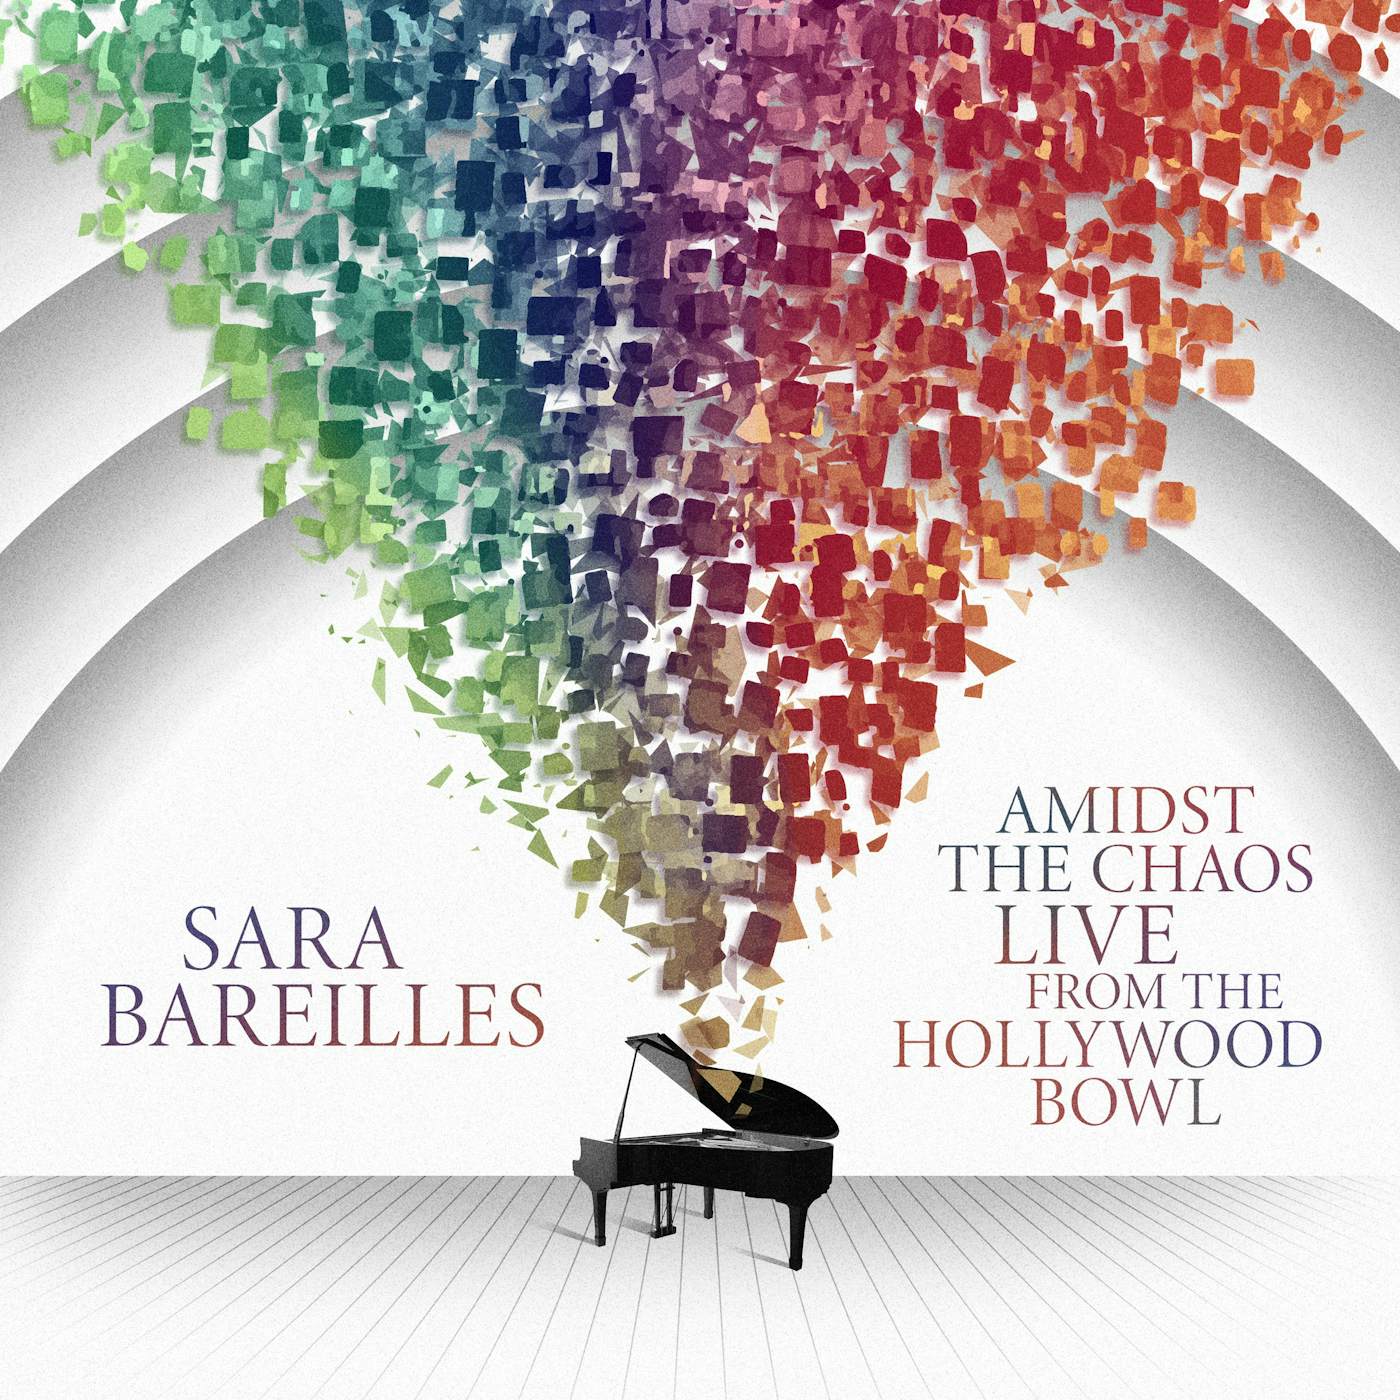 Sara Bareilles Amidst the Chaos: Live from the Hollywood Bowl 2 Disc CD Set